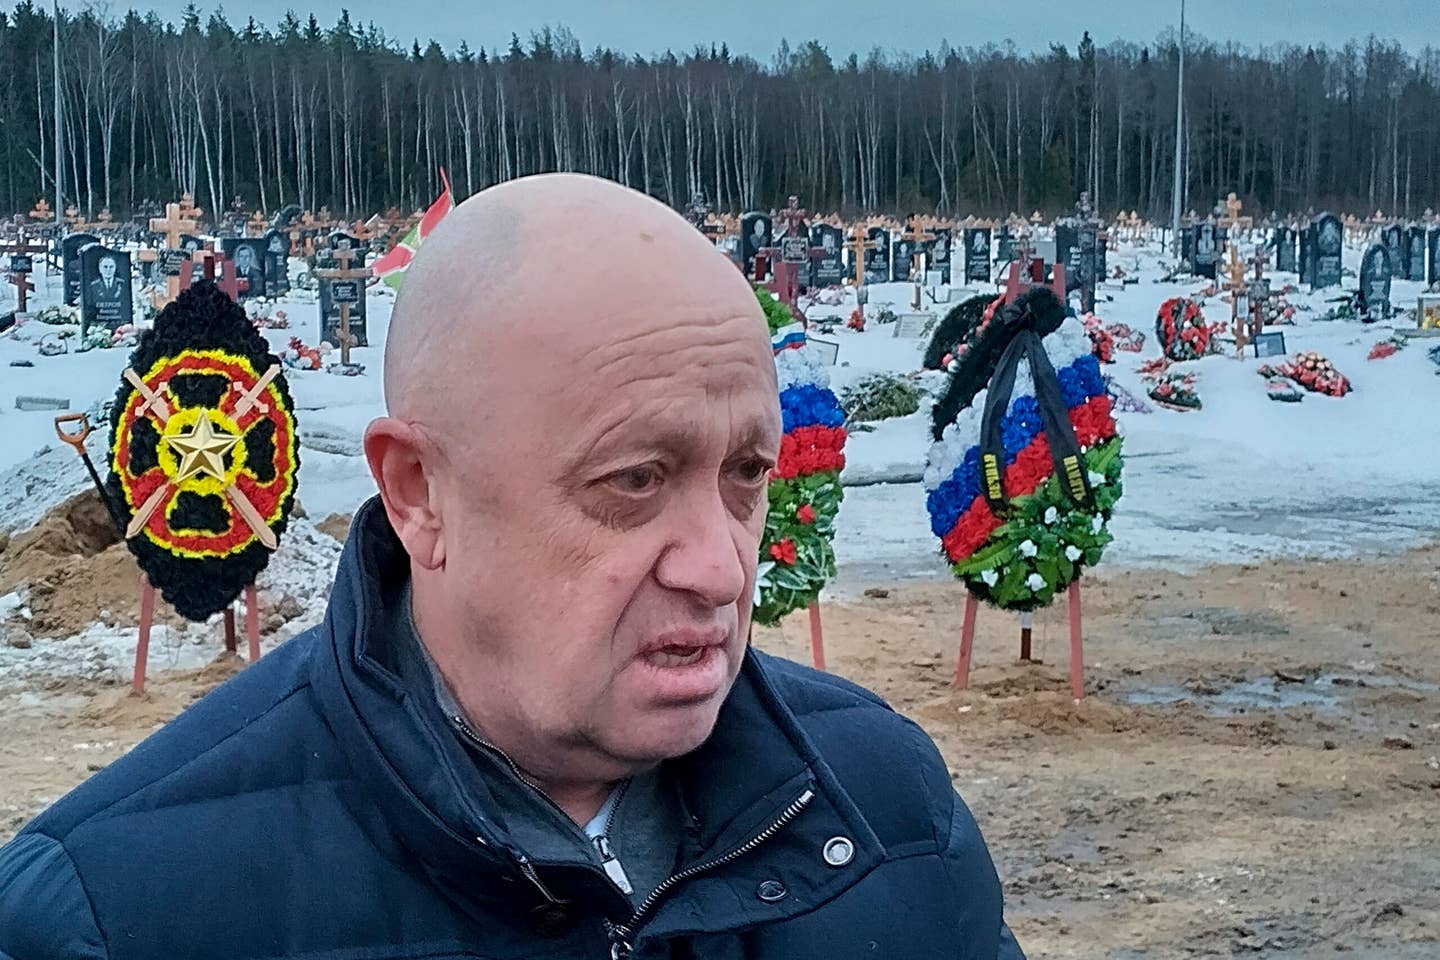 Wagner Group head Yevgeny Prigozhin attends the funeral of one of his troops who died fighting Ukraine. (AP Photo, File)